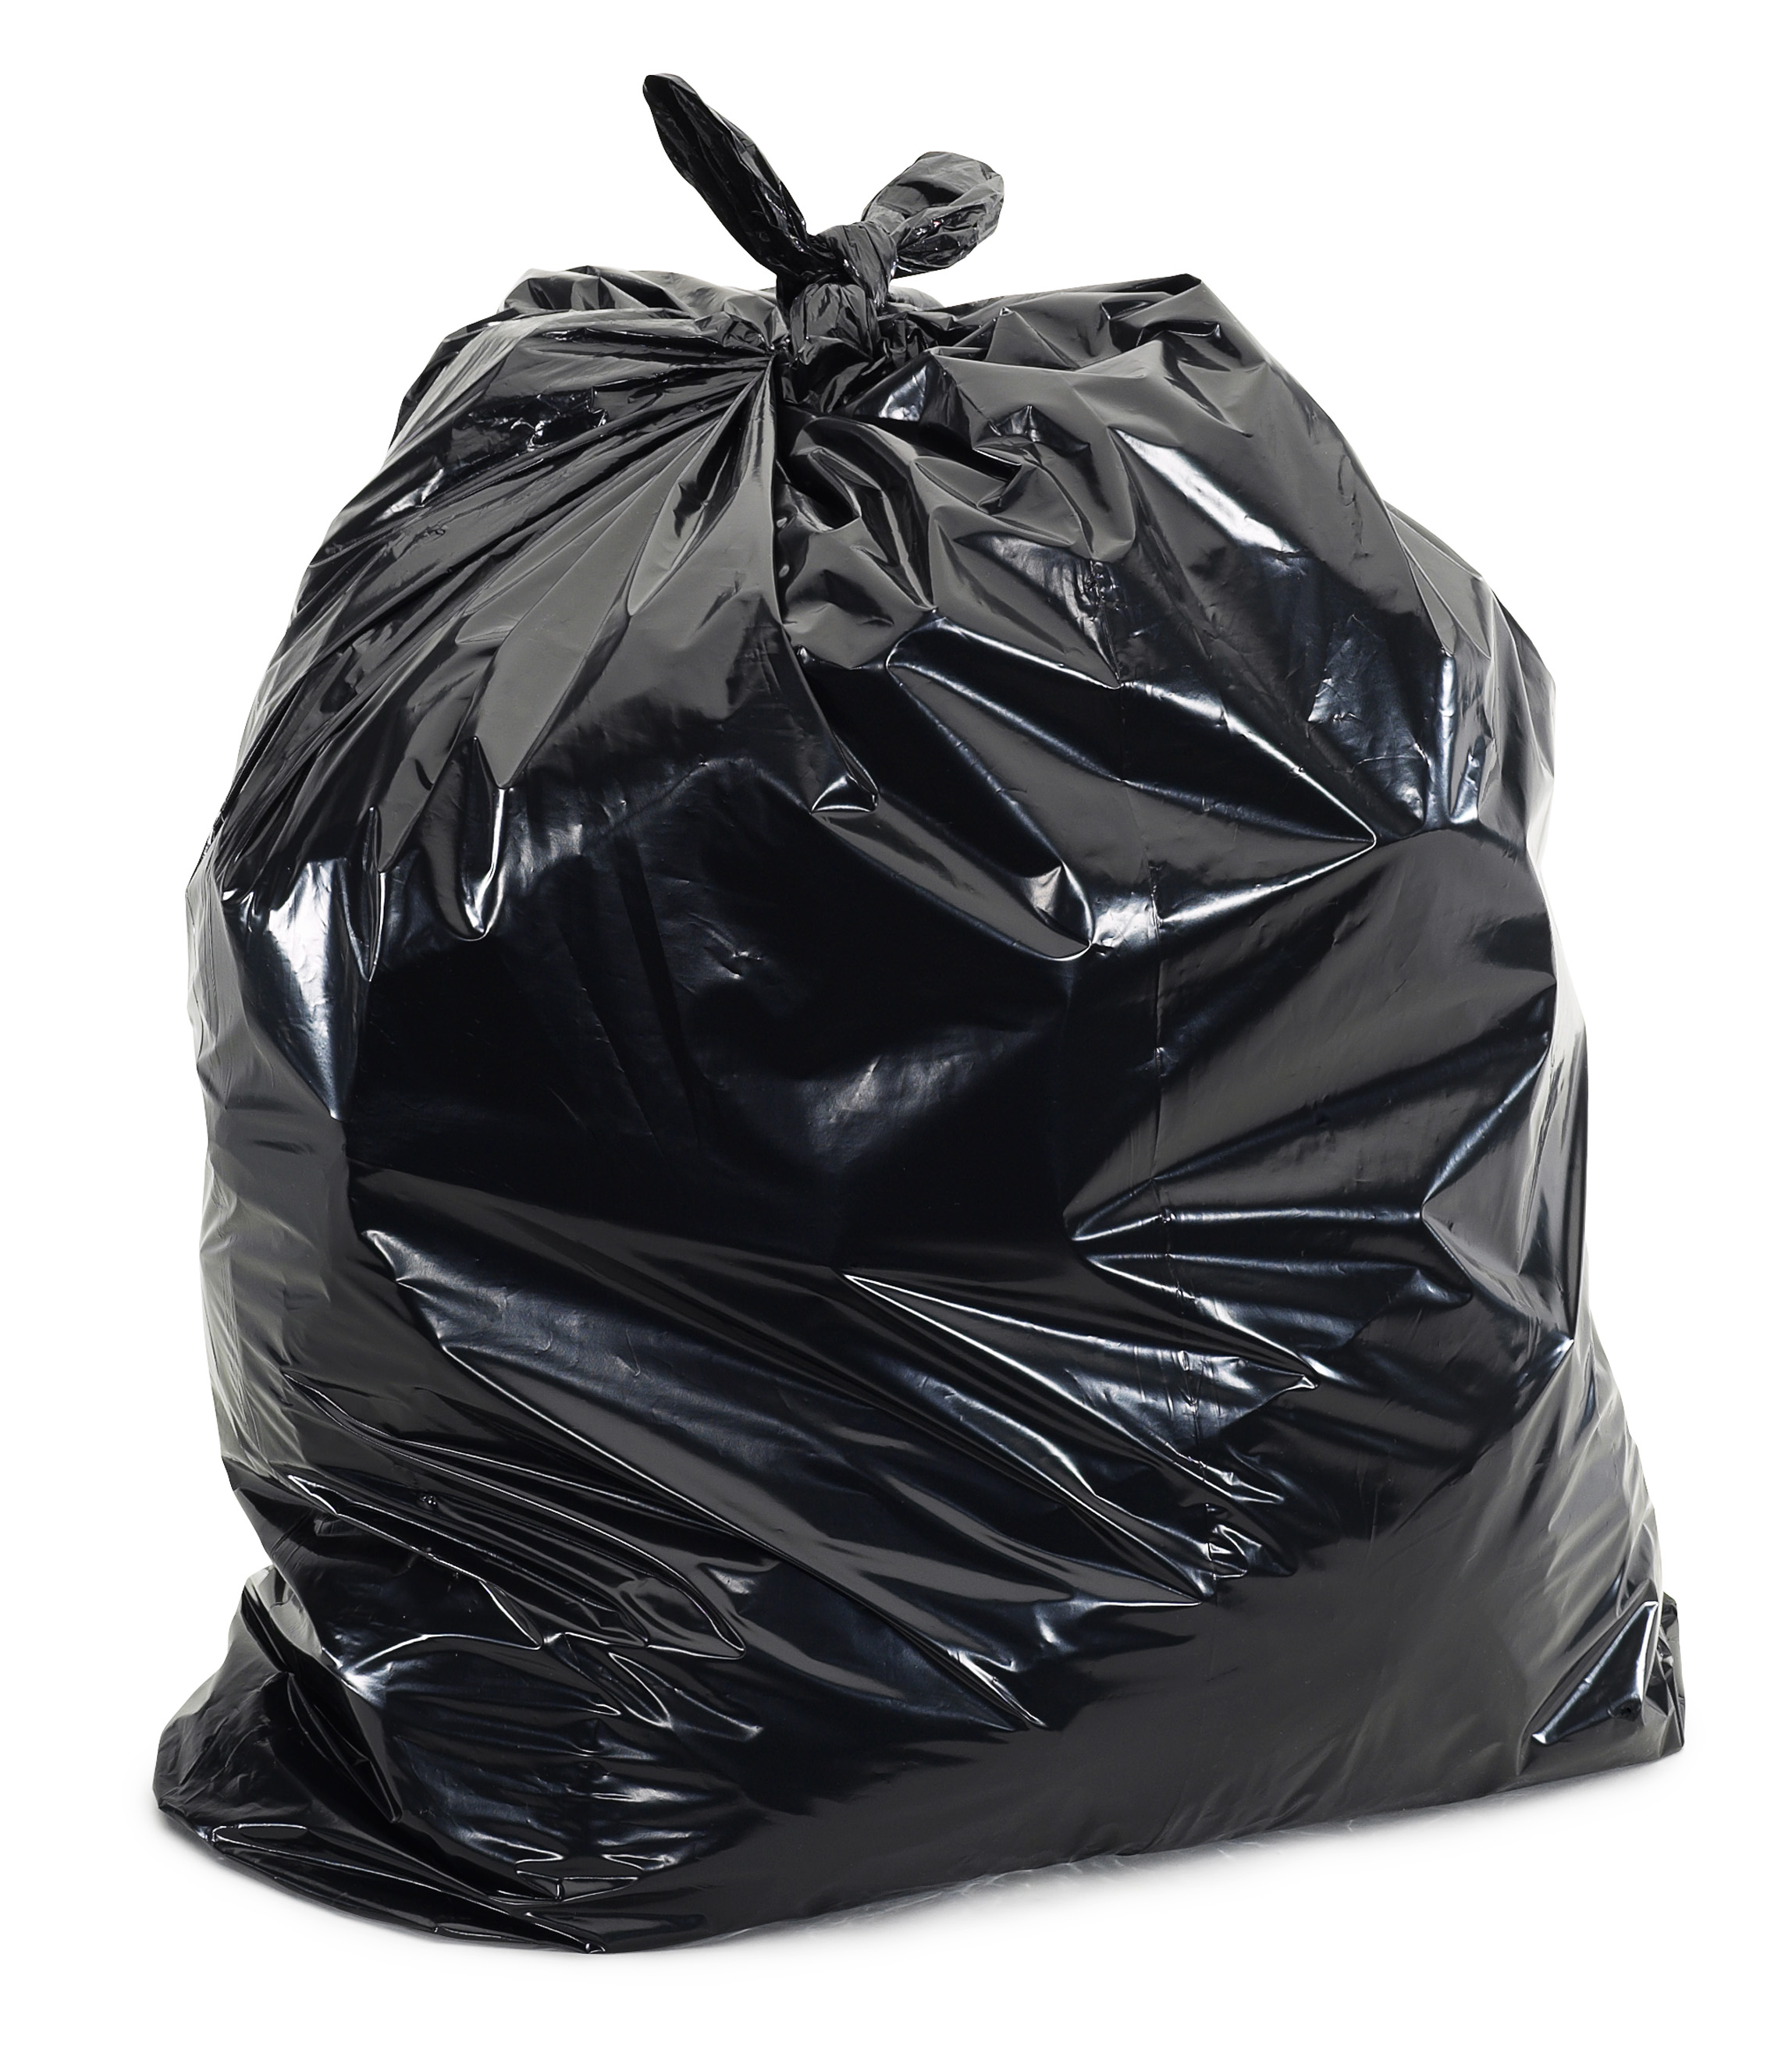 Garbage Bag - hand made clipping path included